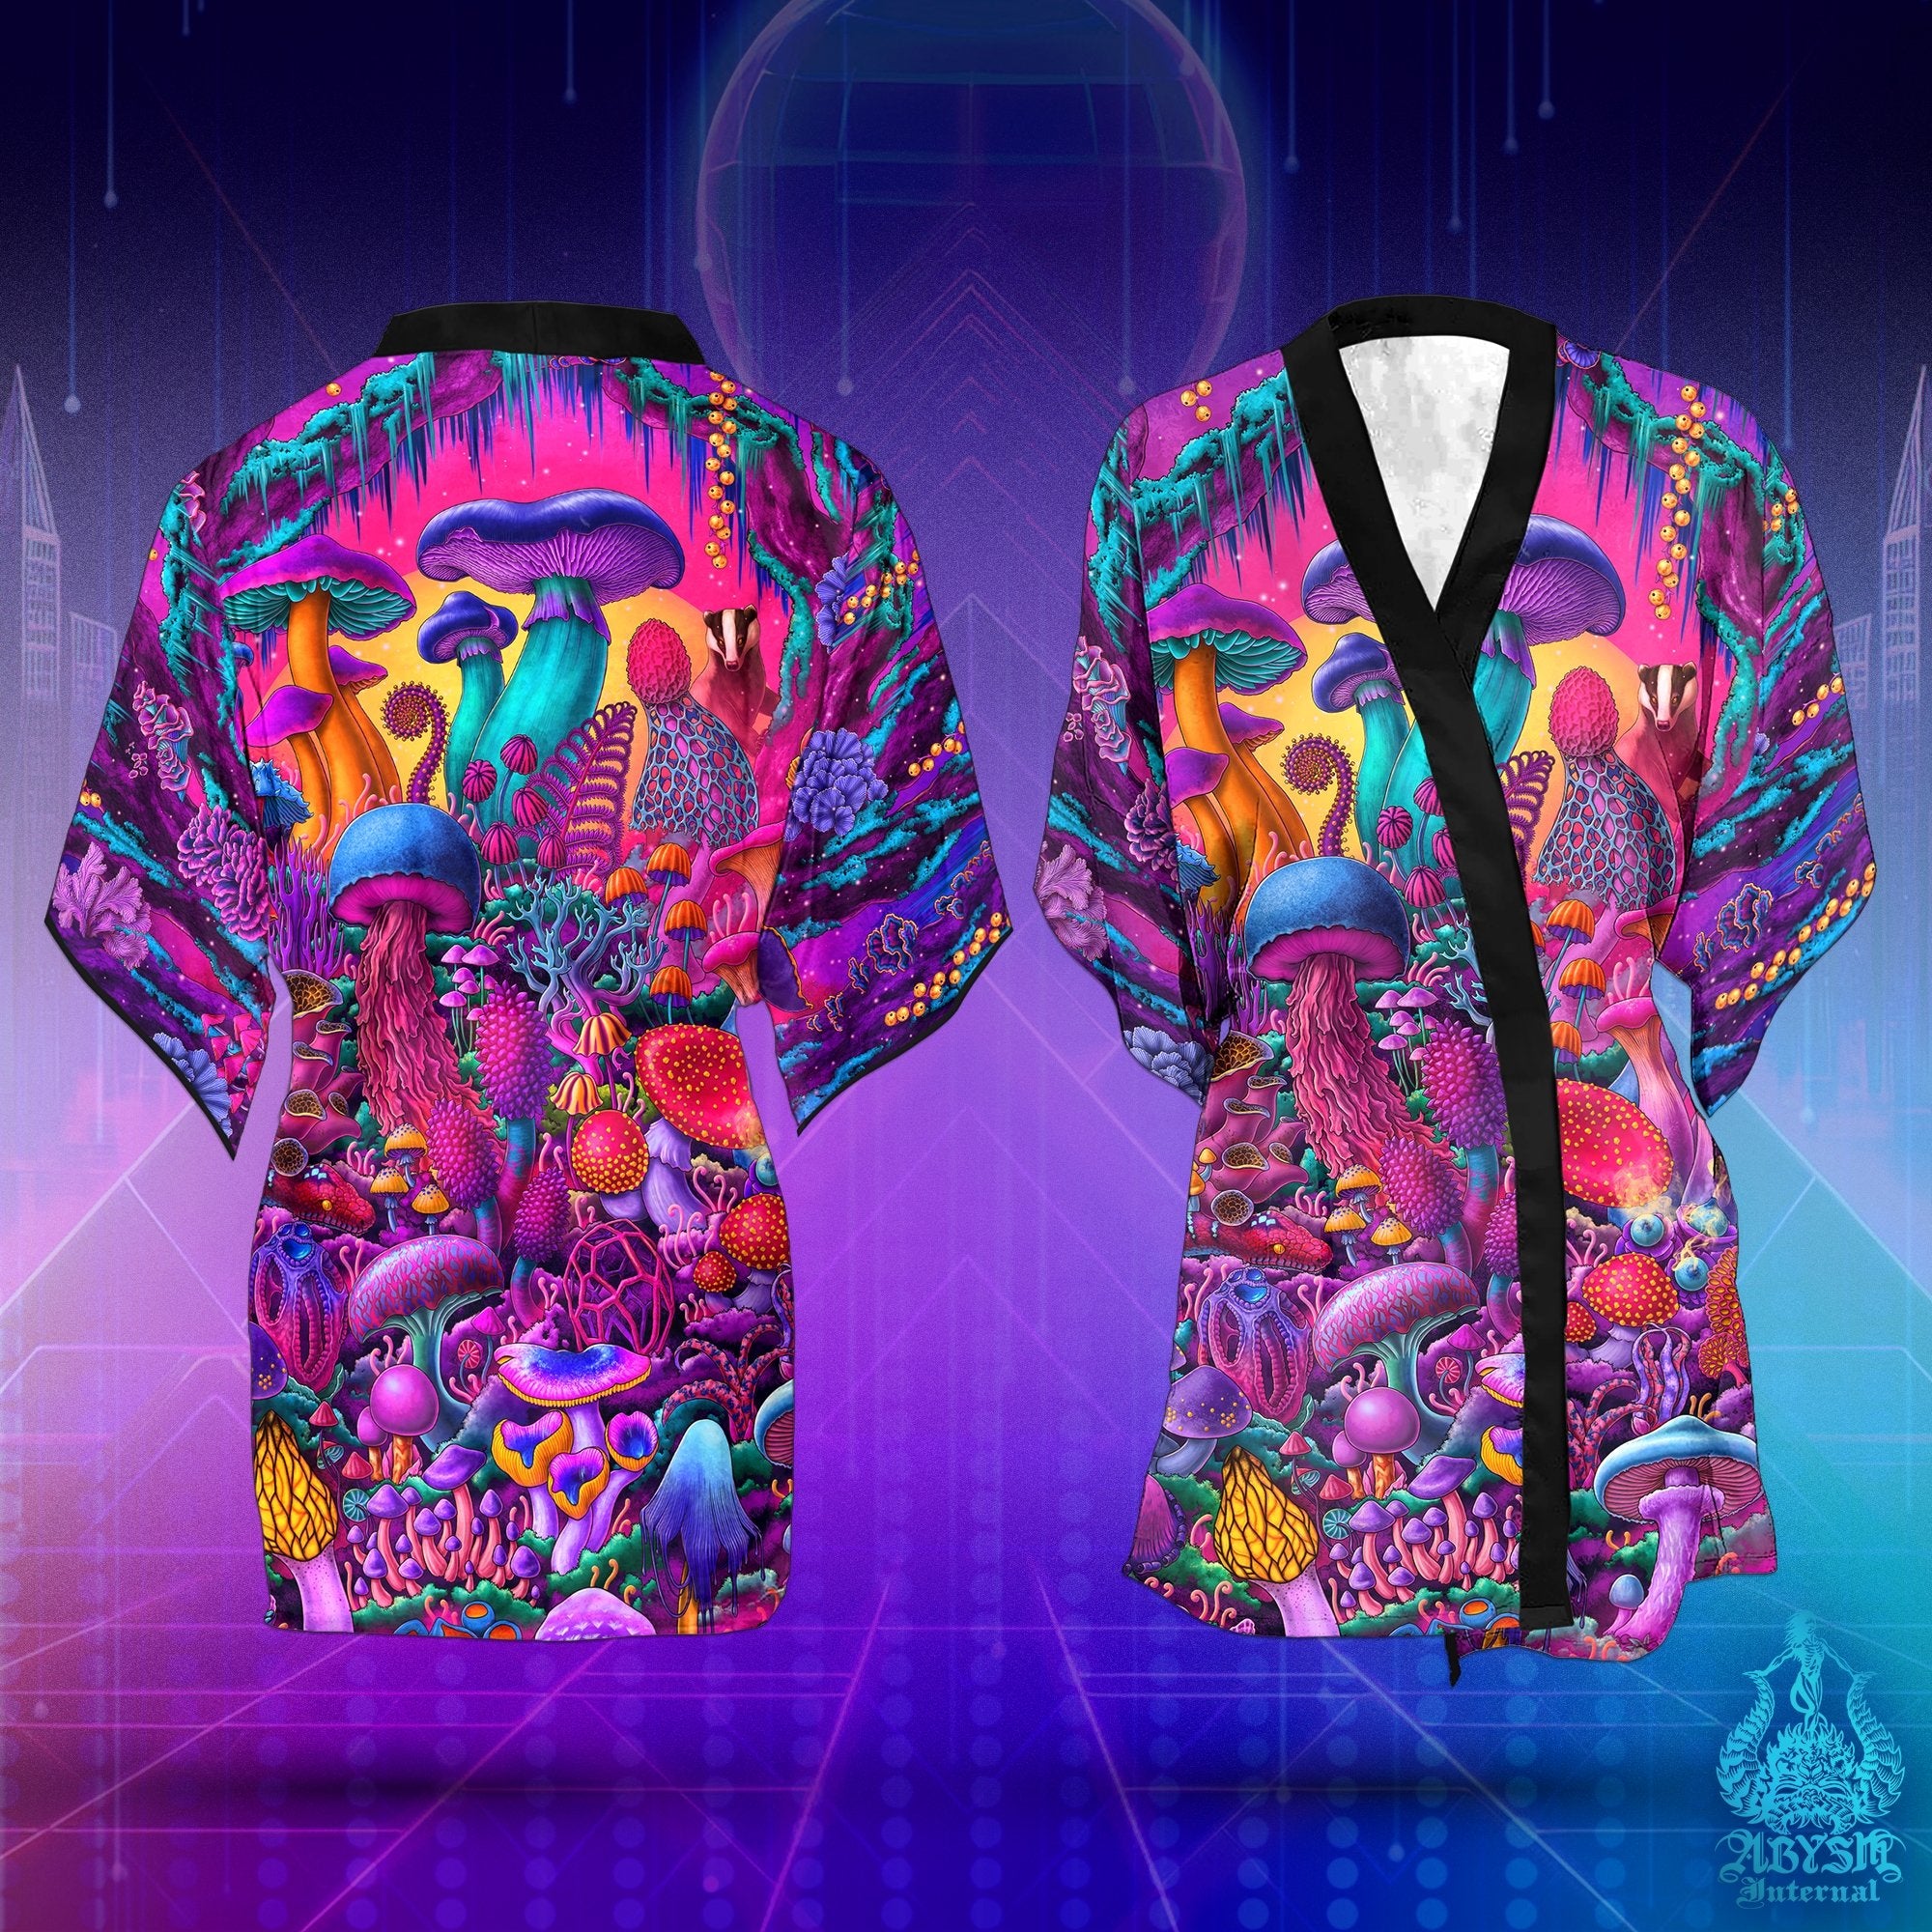 Psychedelic Mushrooms Cover Up, Synthwave Outfit, Retrowave Party Kimono, Vaporwave Summer Festival Robe, 80s Art, Magic Shrooms Gift, Alternative Clothing, Unisex - Abysm Internal